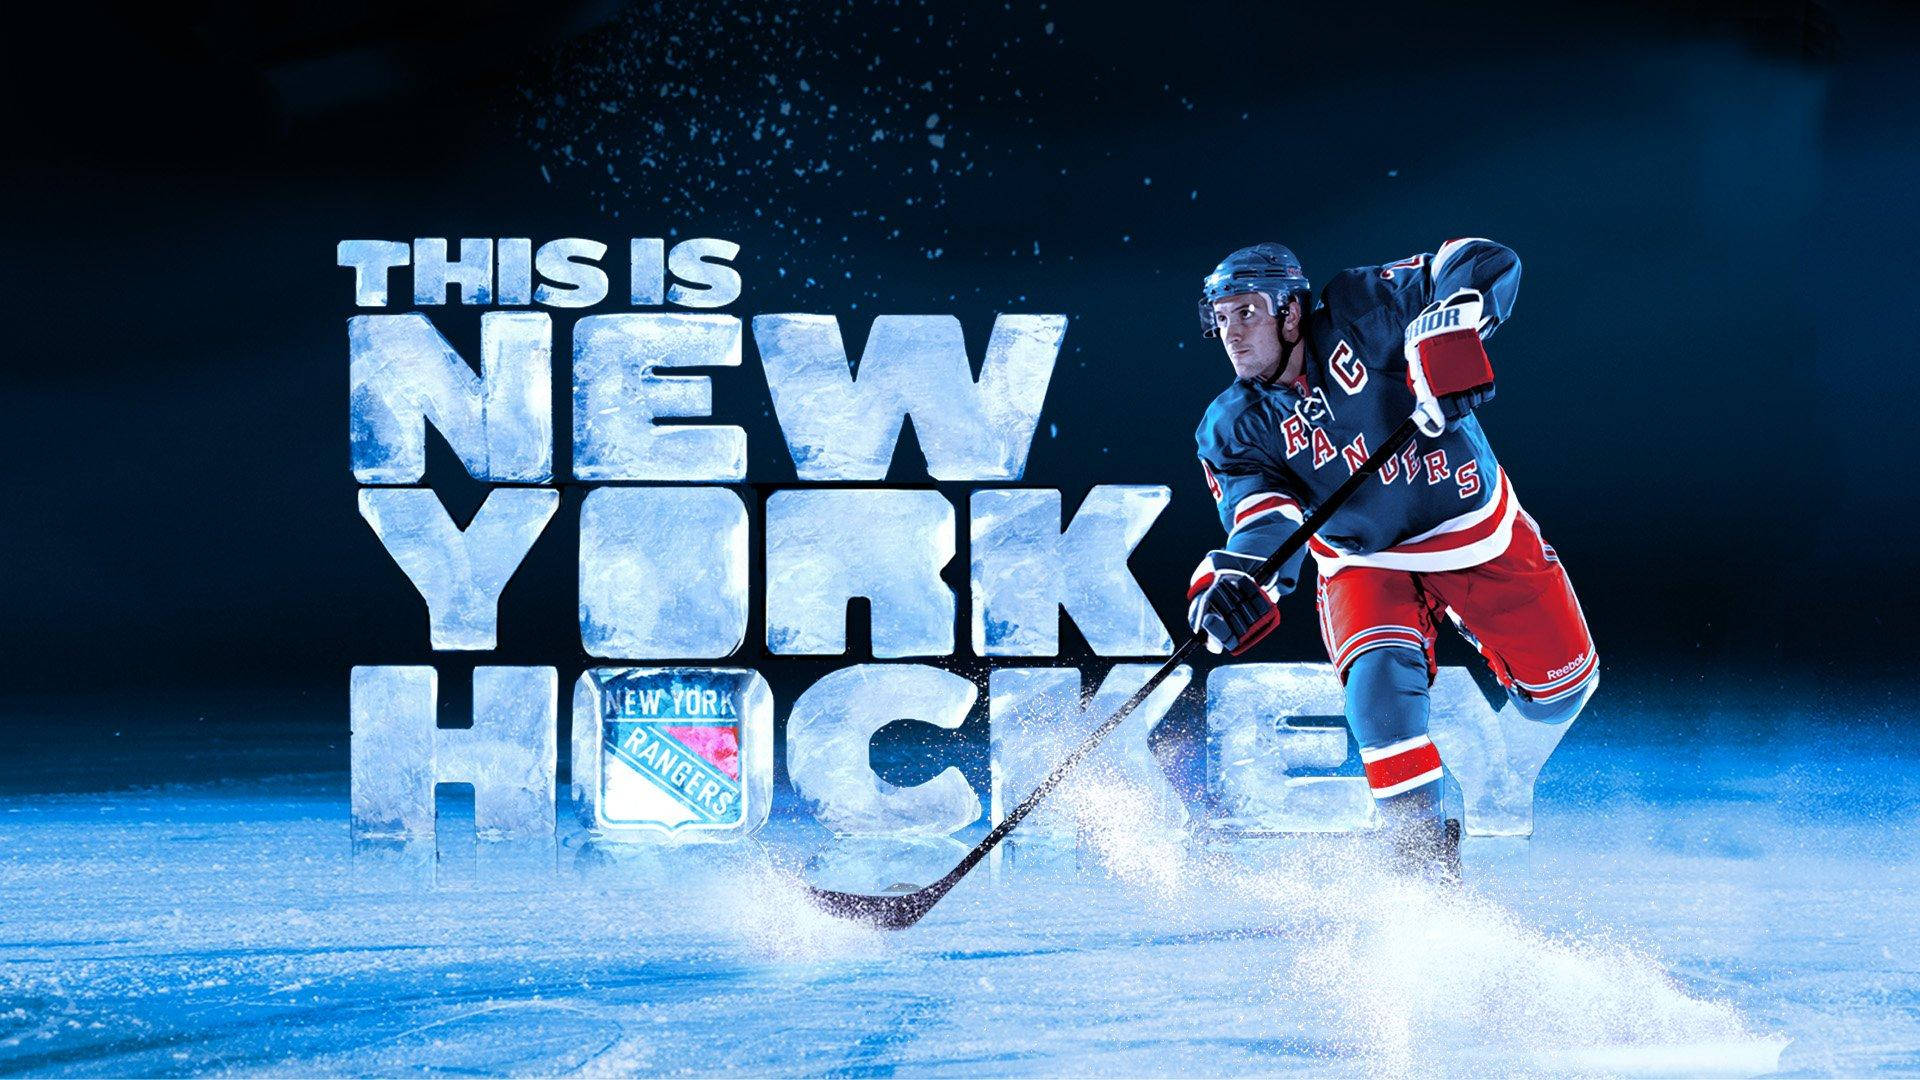 Exciting Ice Hockey Action With The New York Rangers